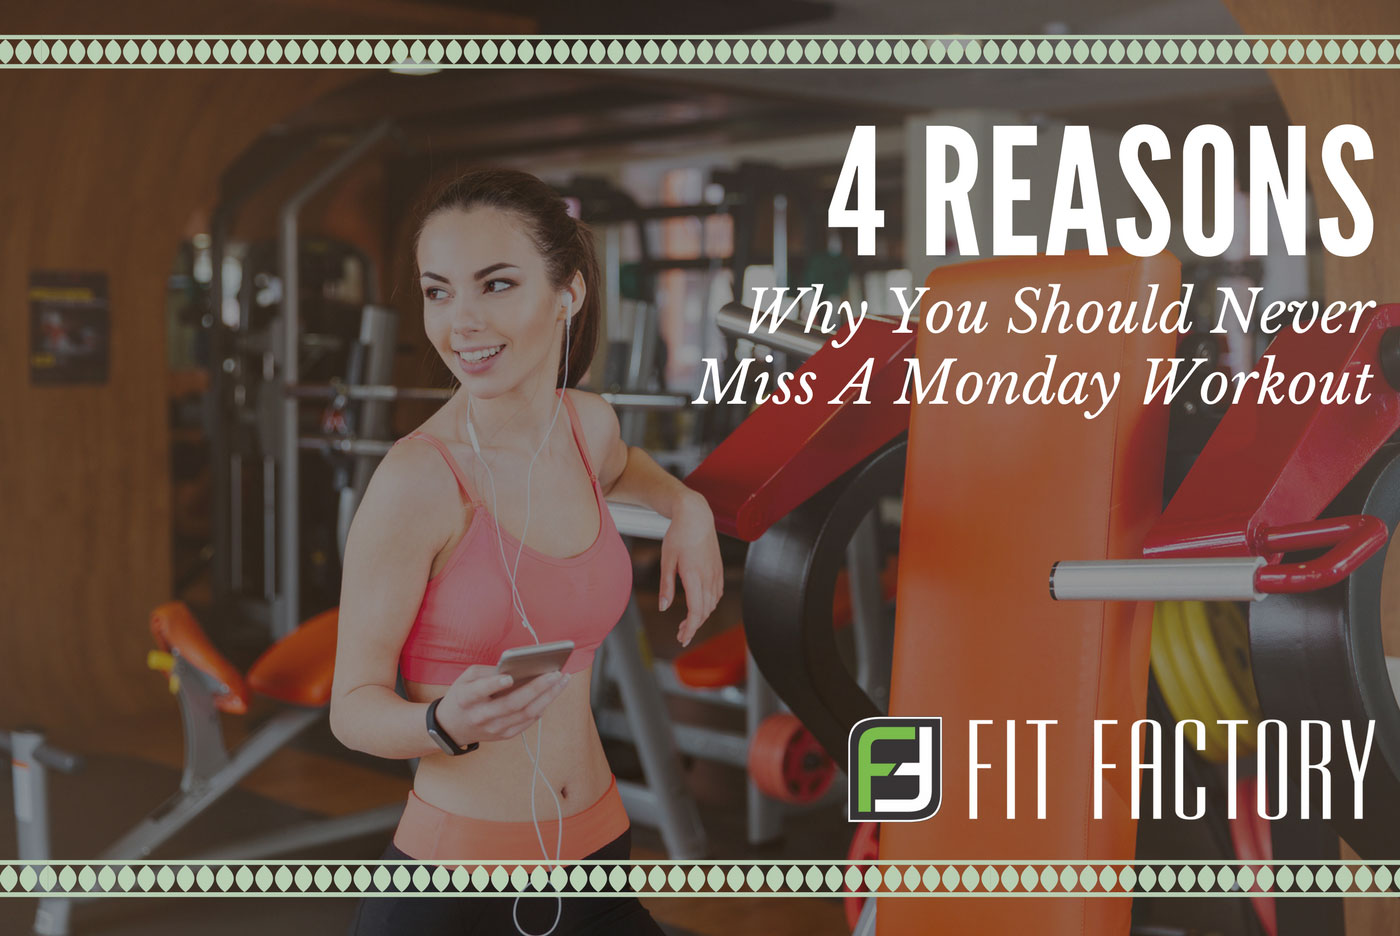 4 Reasons You Should Never Miss a Monday Workout